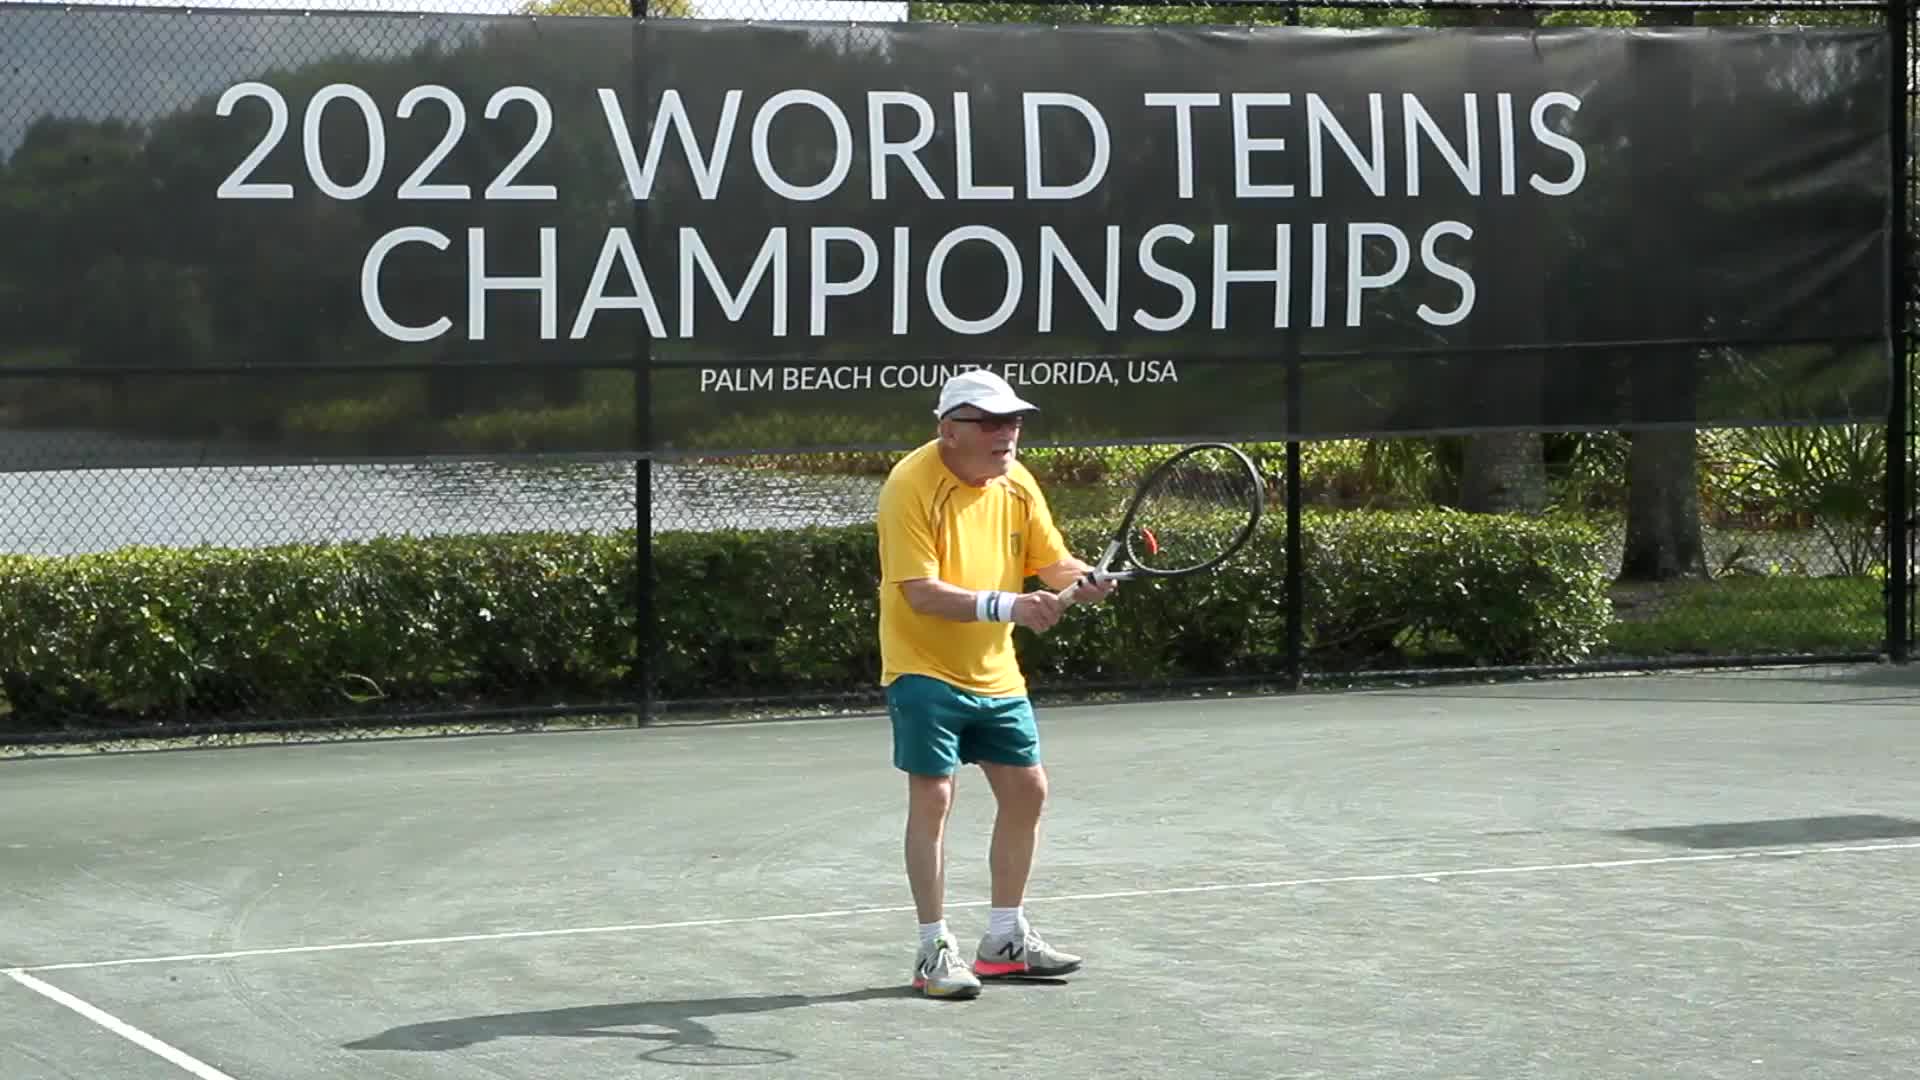 Watch 98-year-old Leonid Stanislavskyi, worlds oldest competitive tennis player, on the court